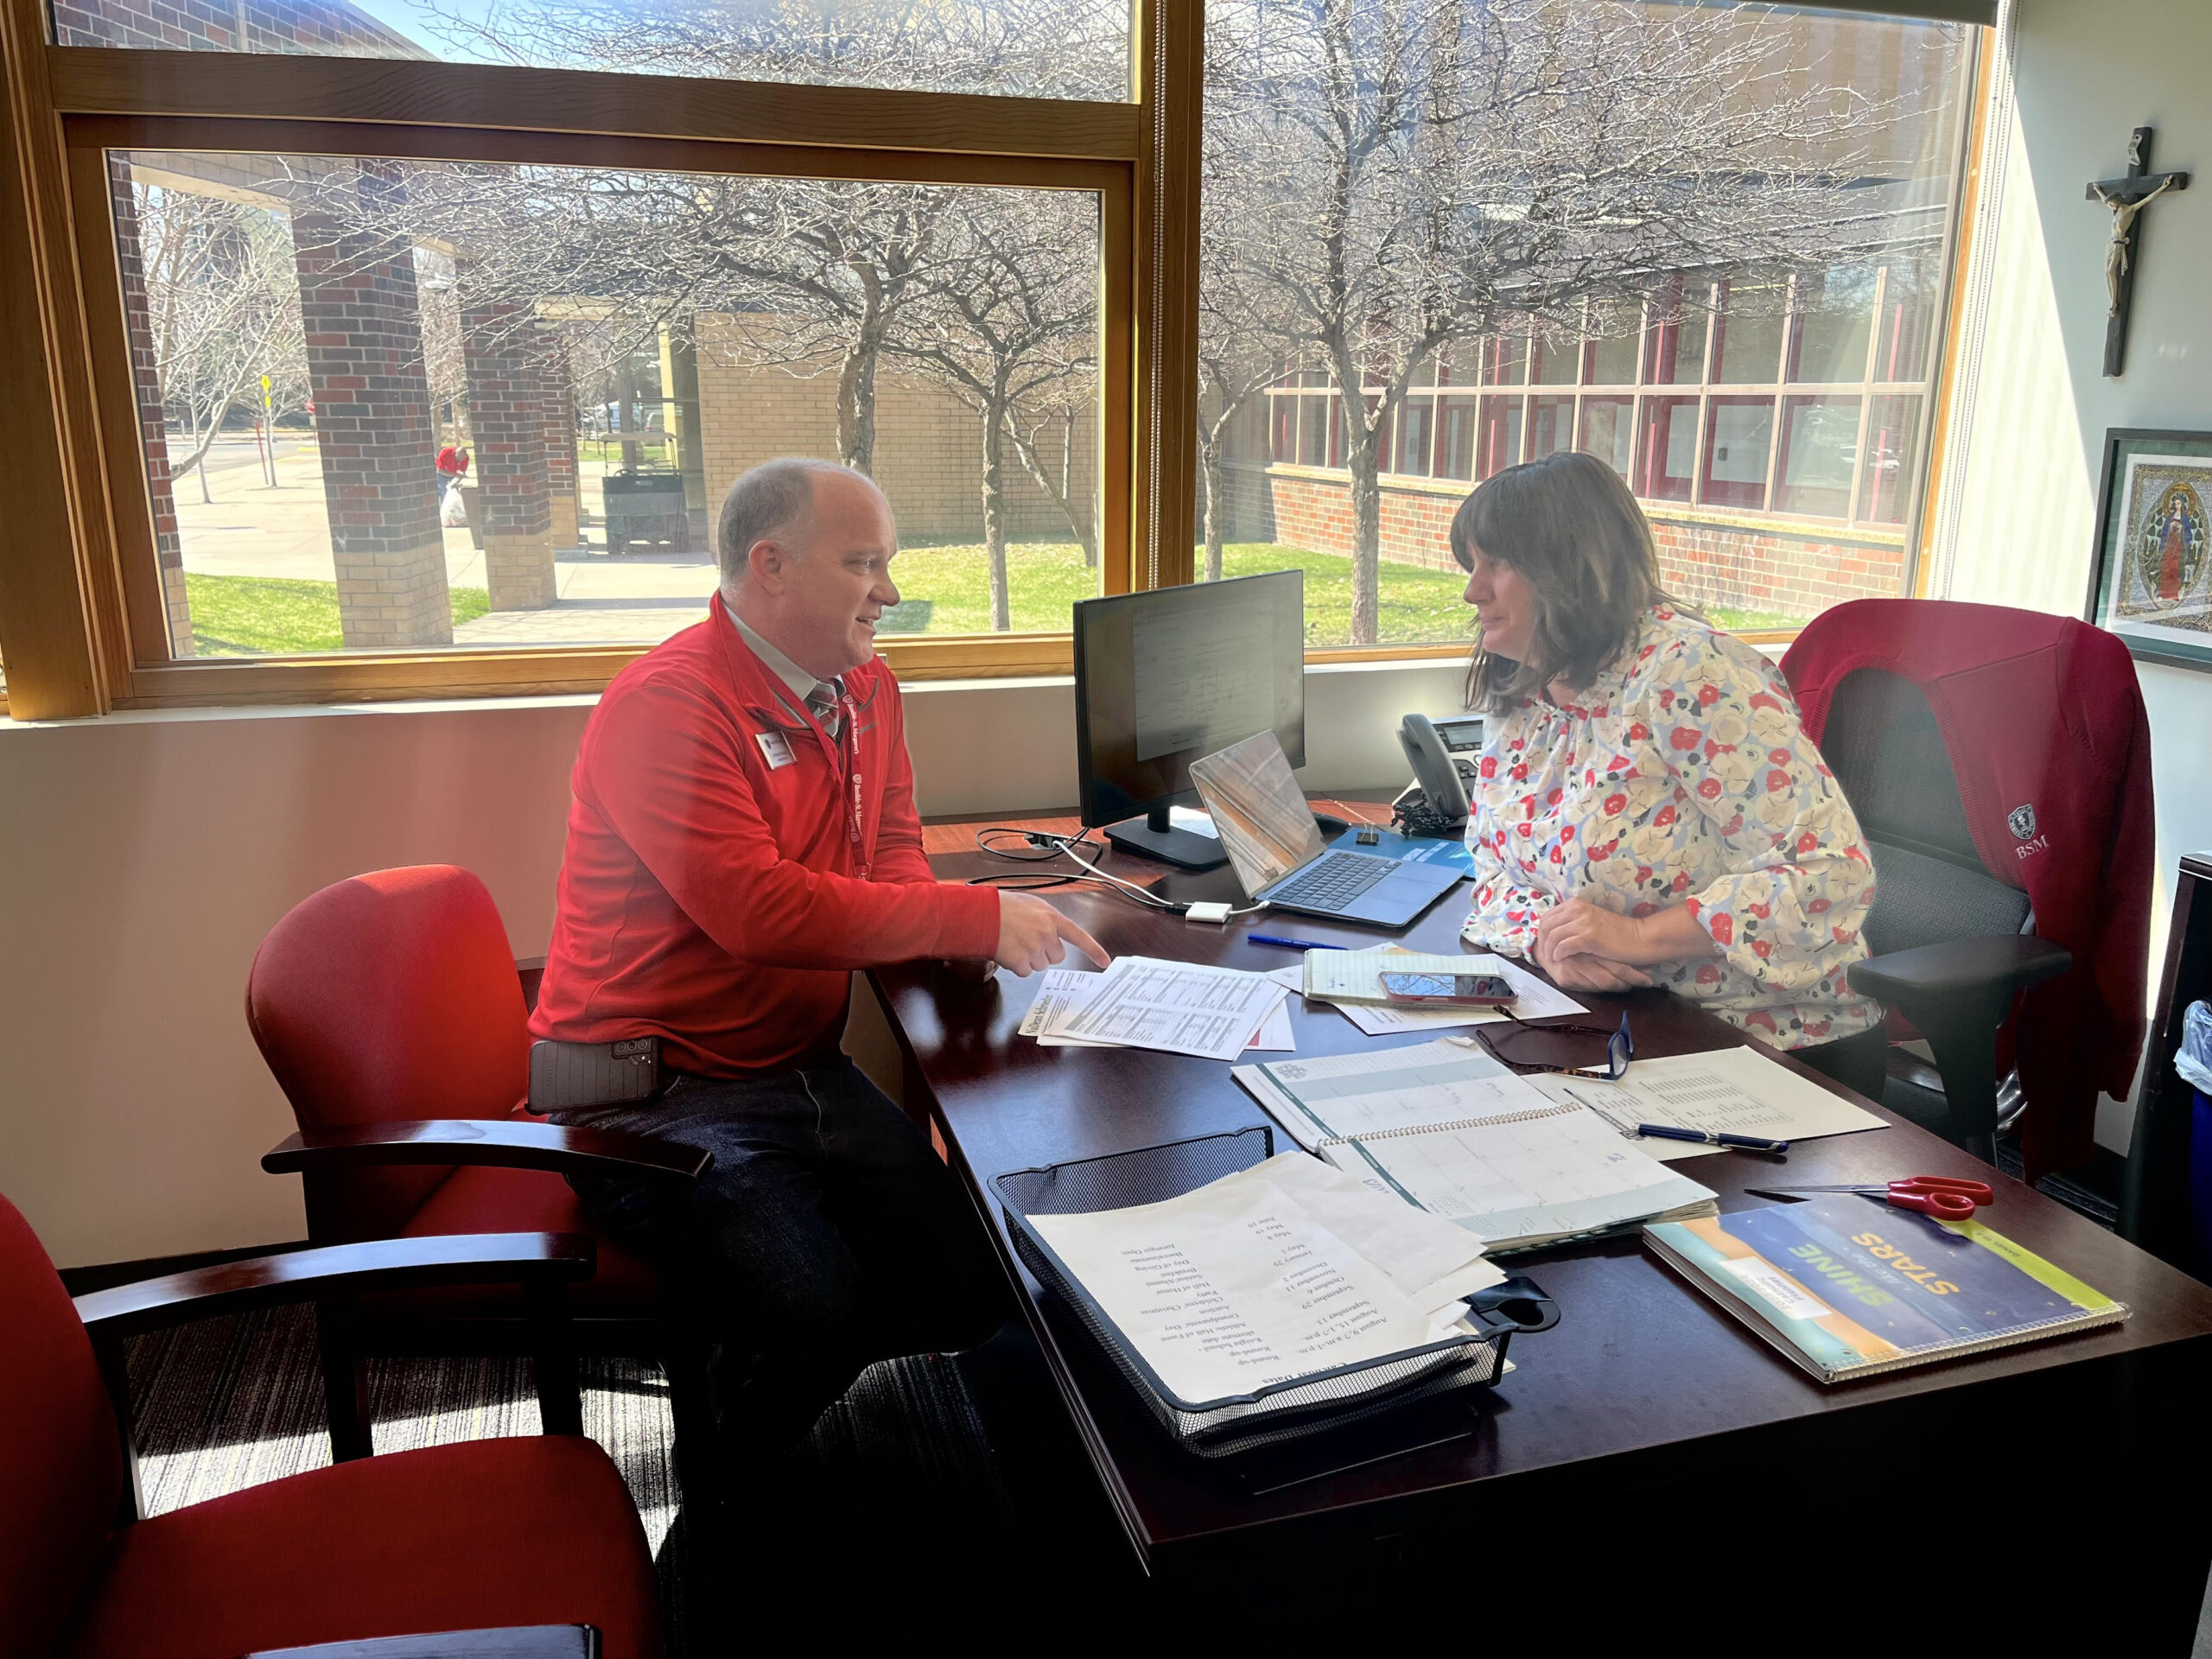 BSM administrators such as Senior High Principal Stephanie Nitchals and Senior High Assistant Principal Matt Weingartz have been hard at work making changes to issues presented by students.